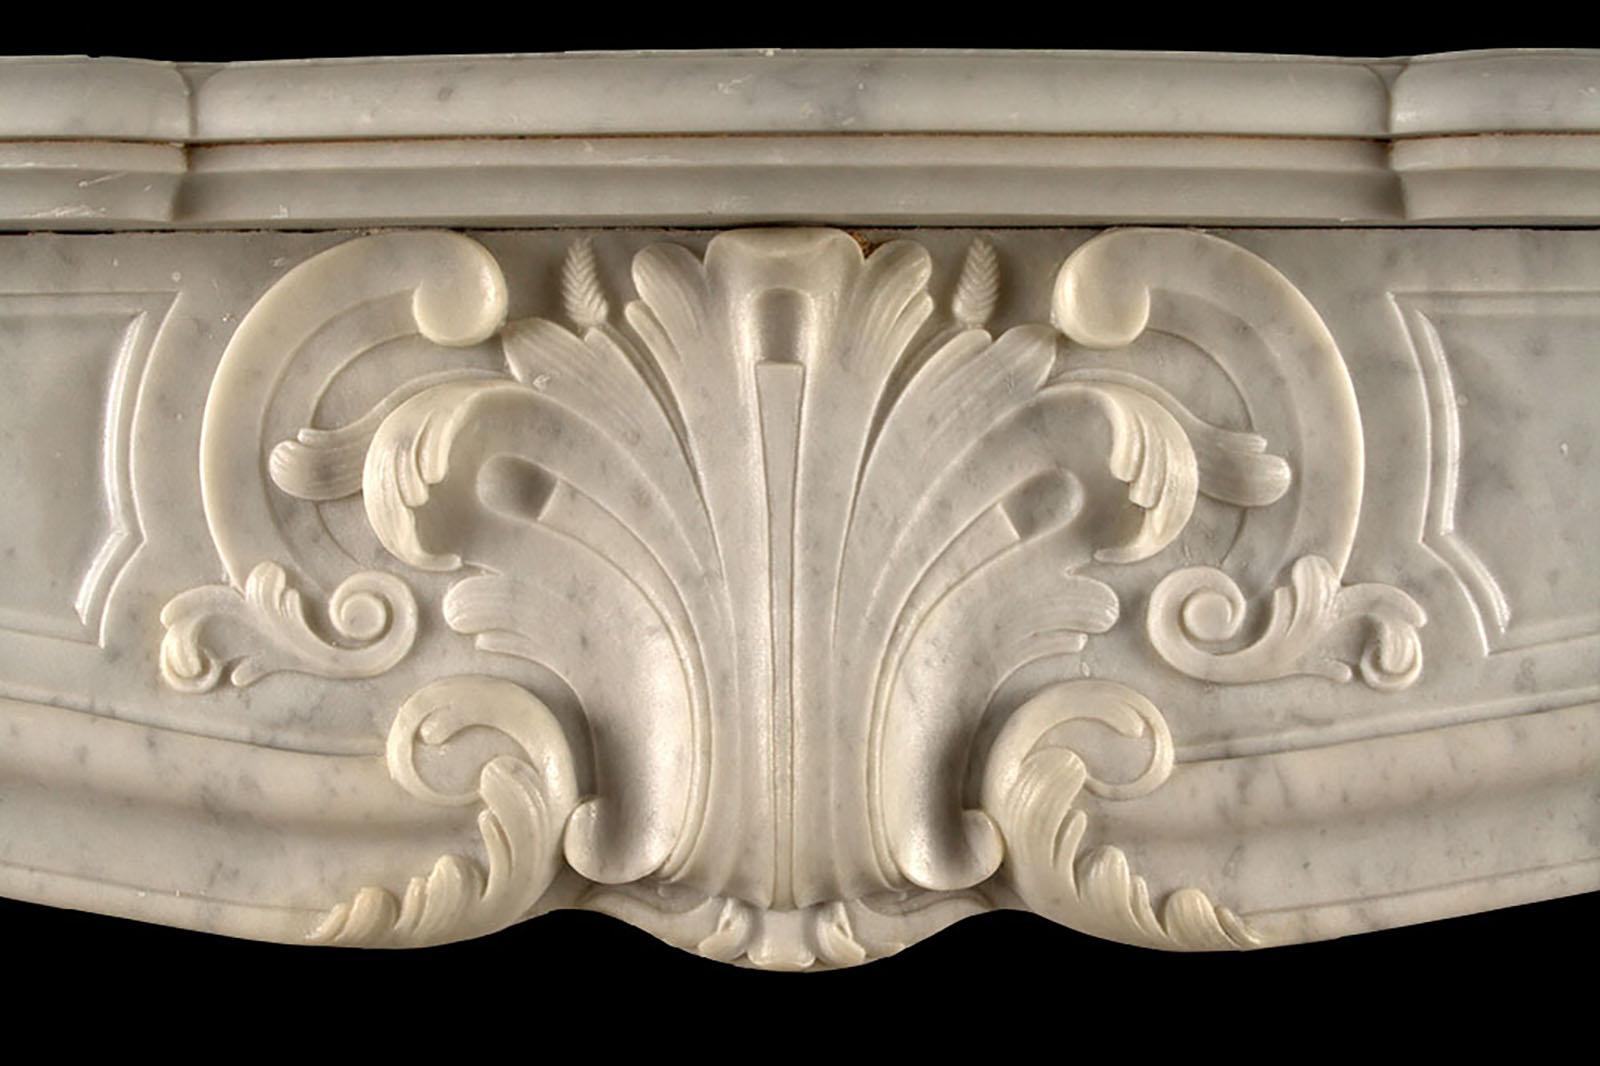 A Large Antique Louis XV Fireplace in The Rococo Manner

A Large Antique Louis XV Fireplace finely carved in White Carrara marble in the Rococo manner, with a moulded serpentine shelf over the panelled frieze which is centred by the shell